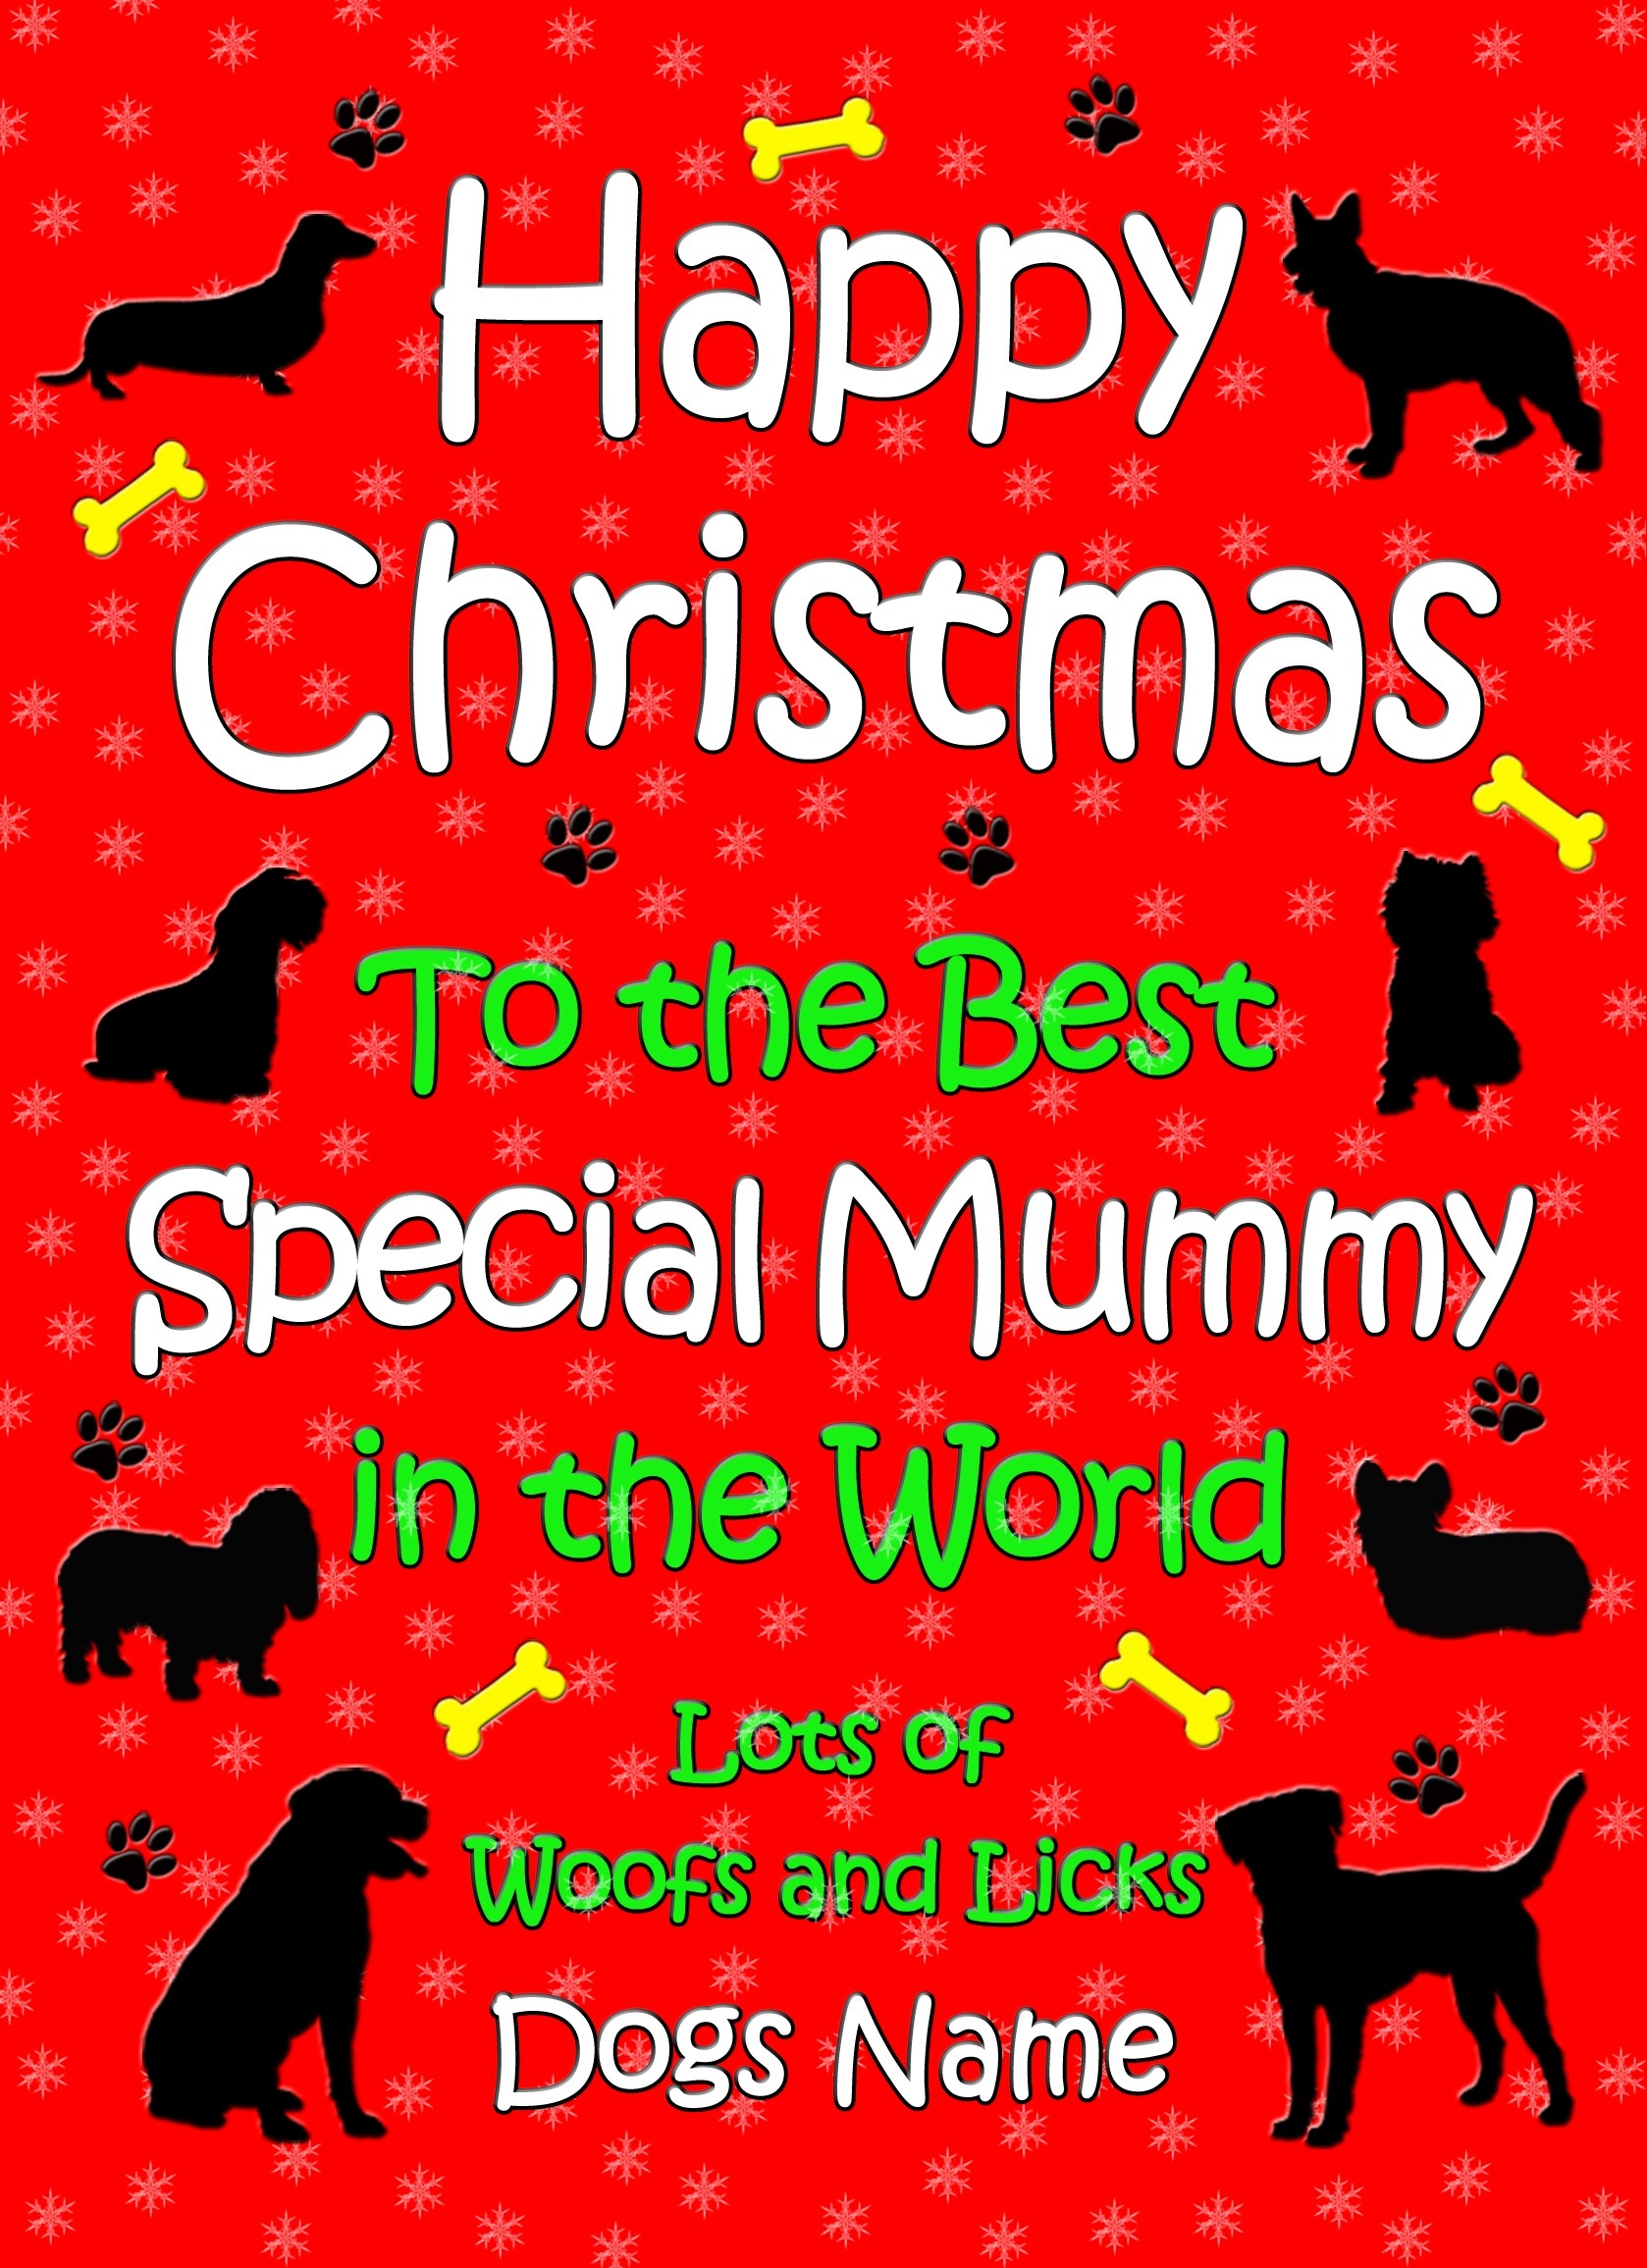 Personalised From The Dog Christmas Card (Special Mummy, Red)